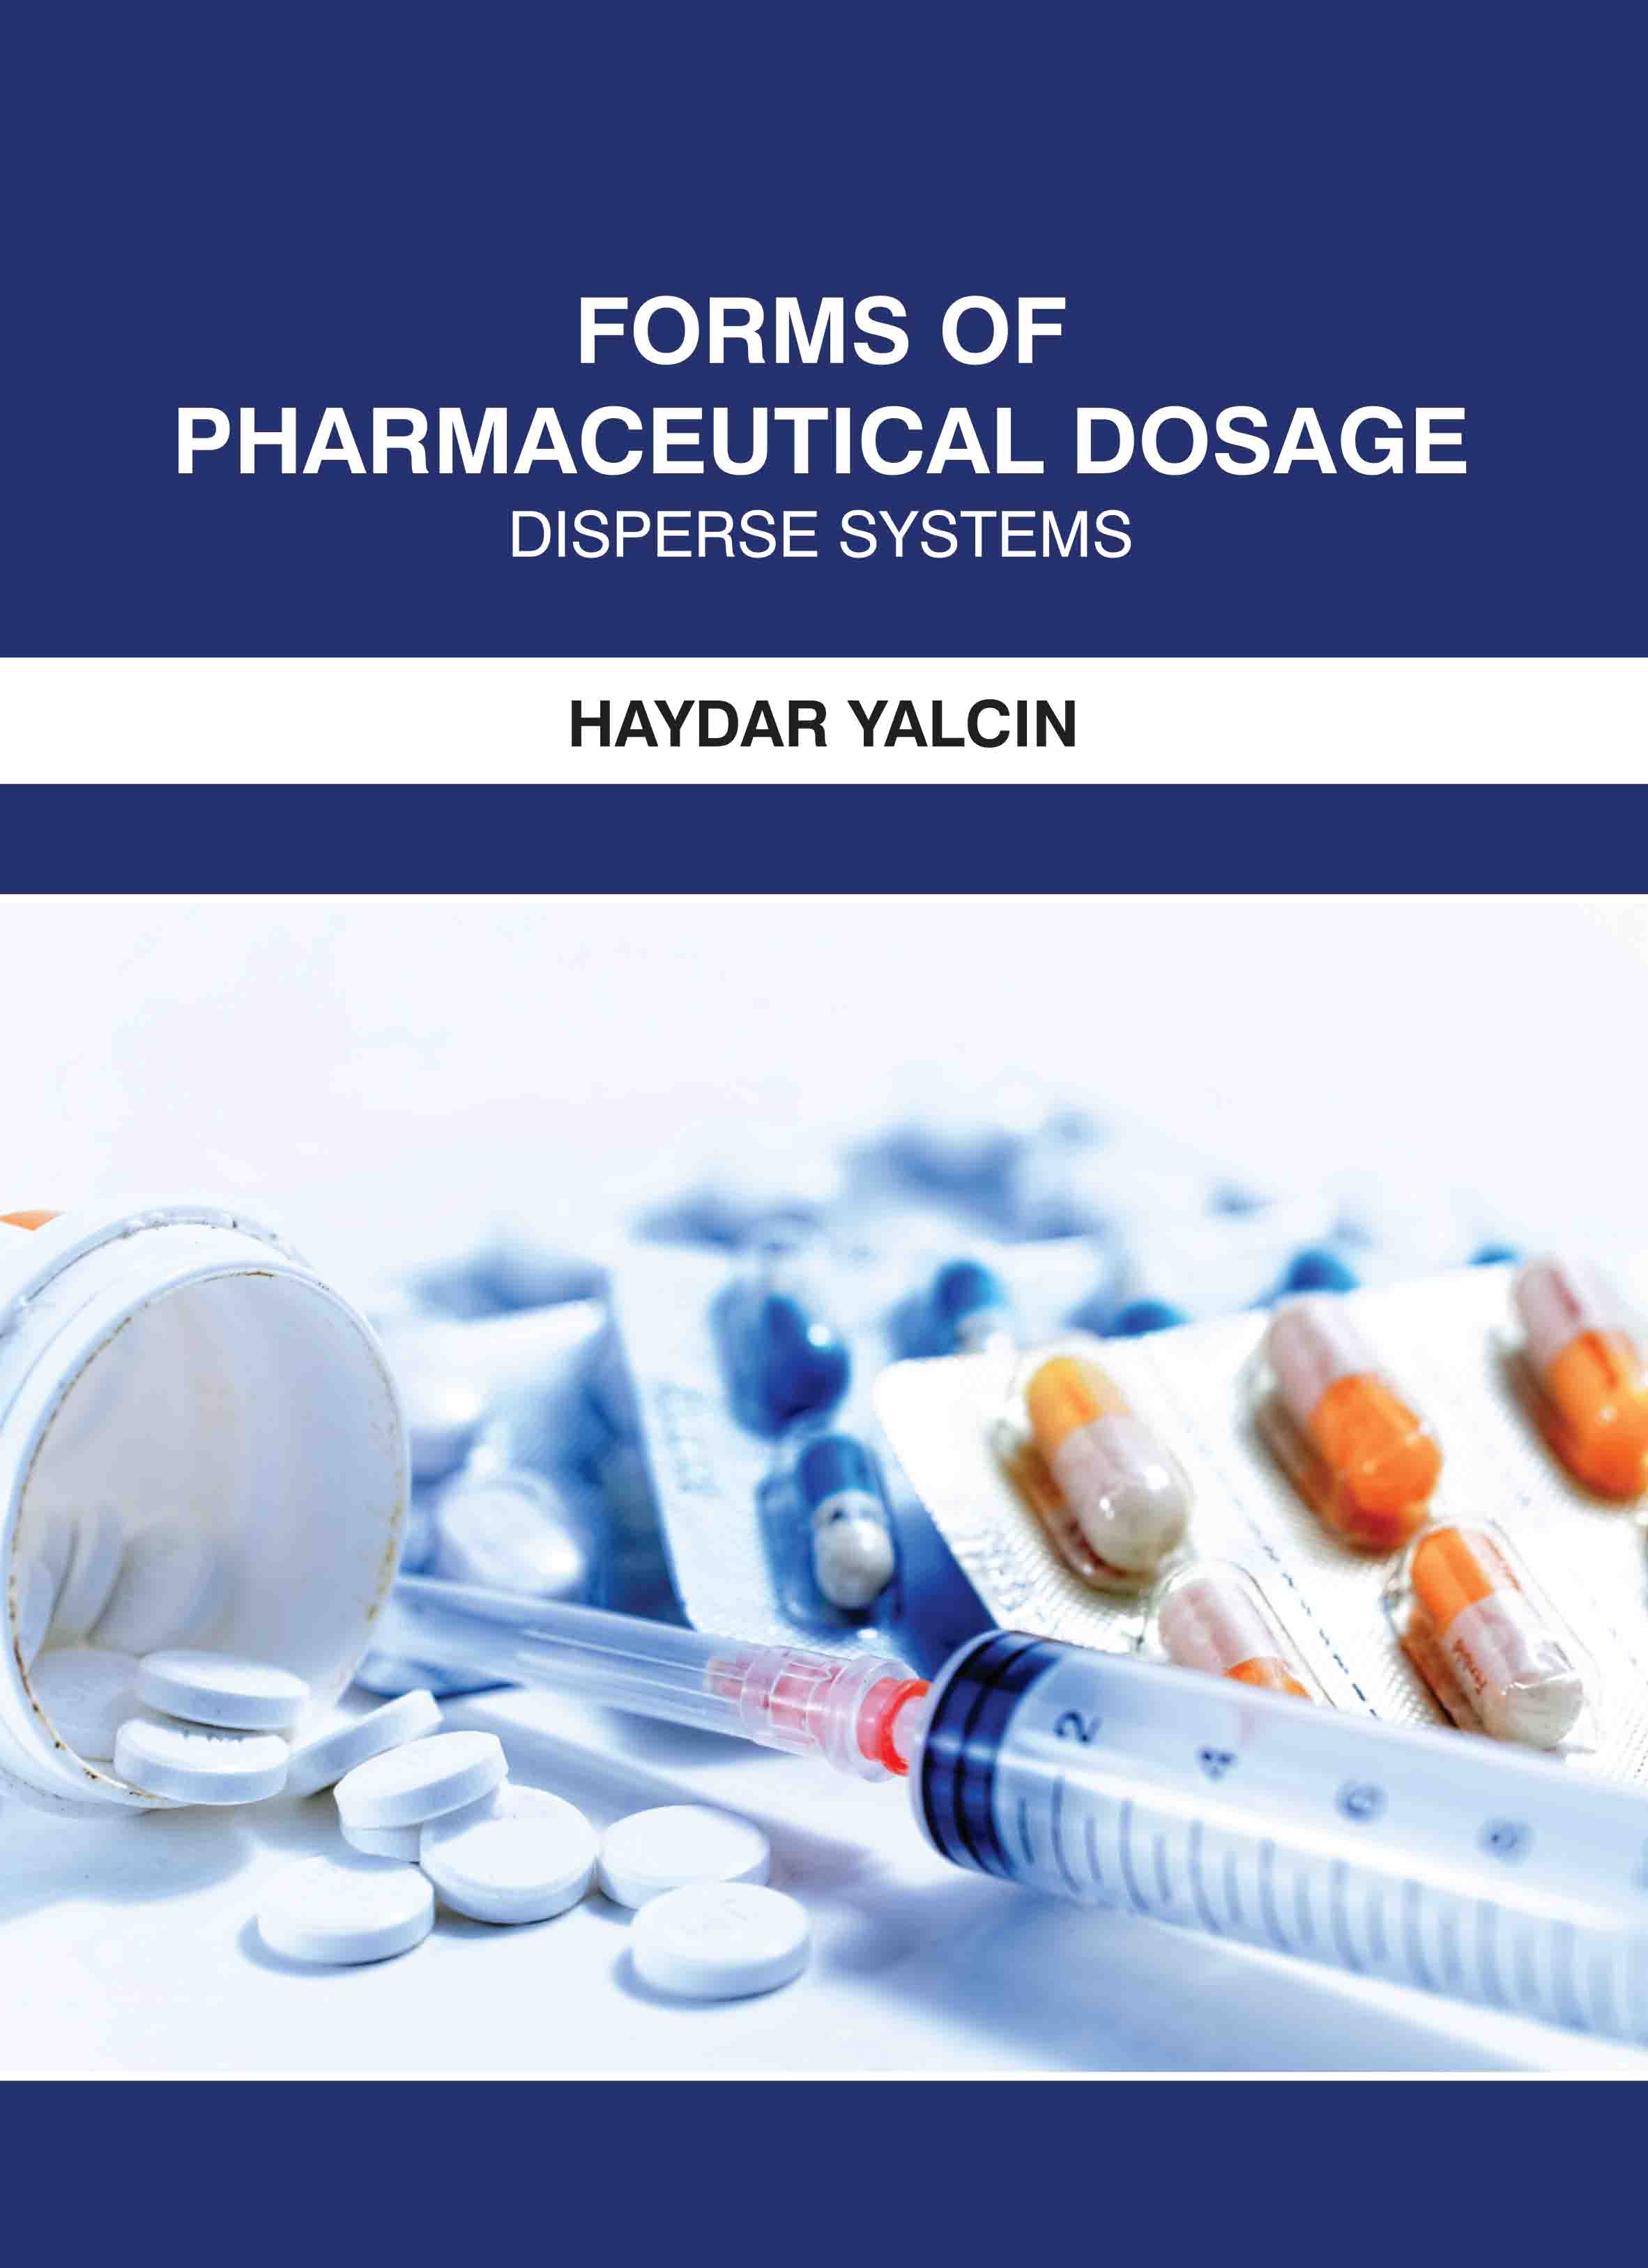 Forms of Pharmaceutical Dosage: Disperse Systems